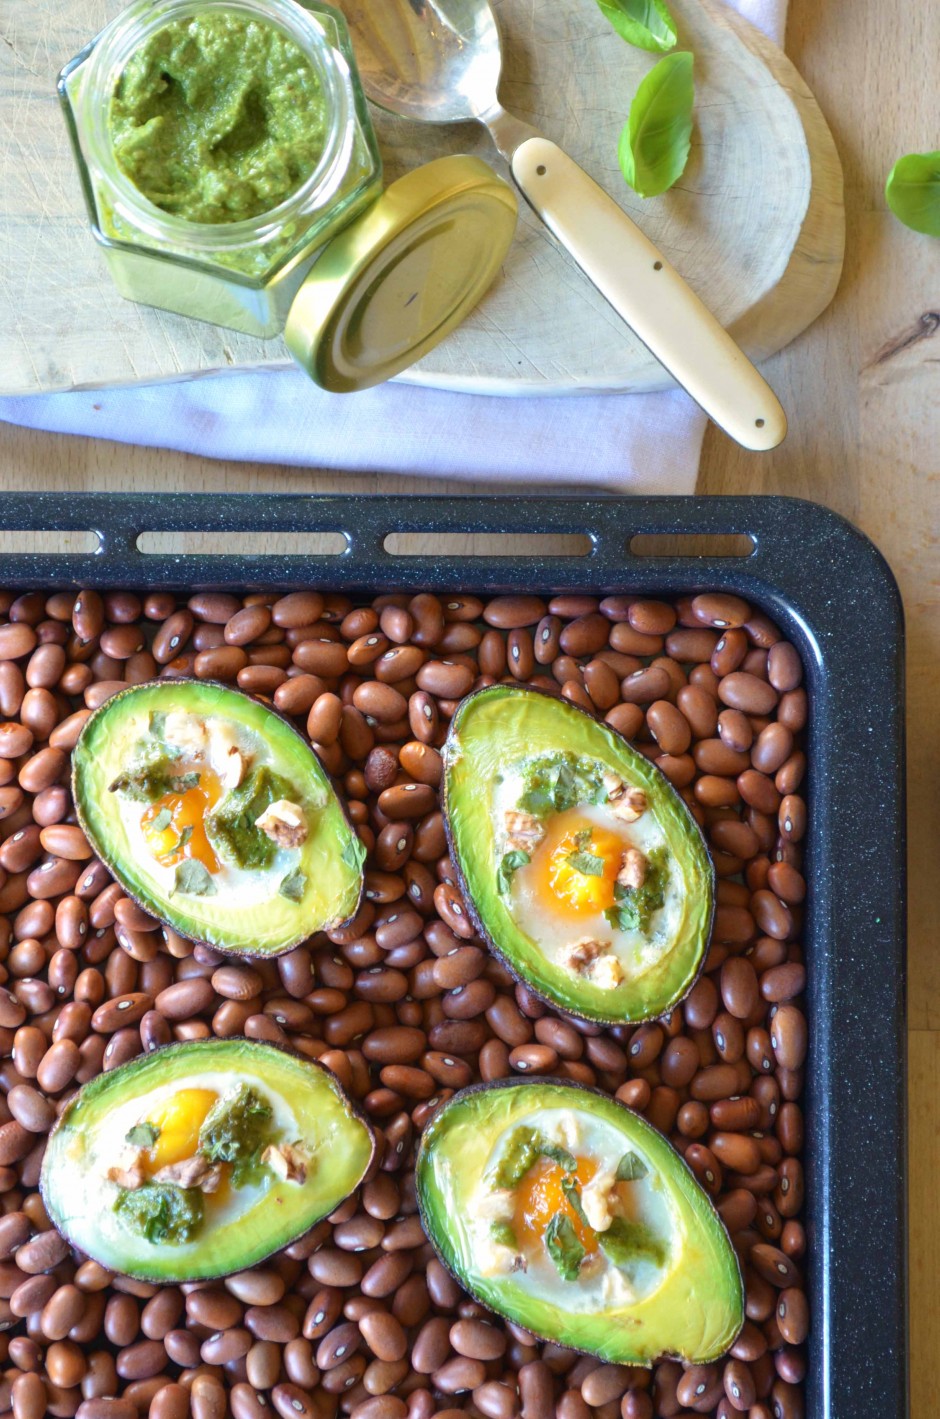 Baked avocado boats with eggs and creamy pesto. Recipe and photo by That Healthy Kitchen